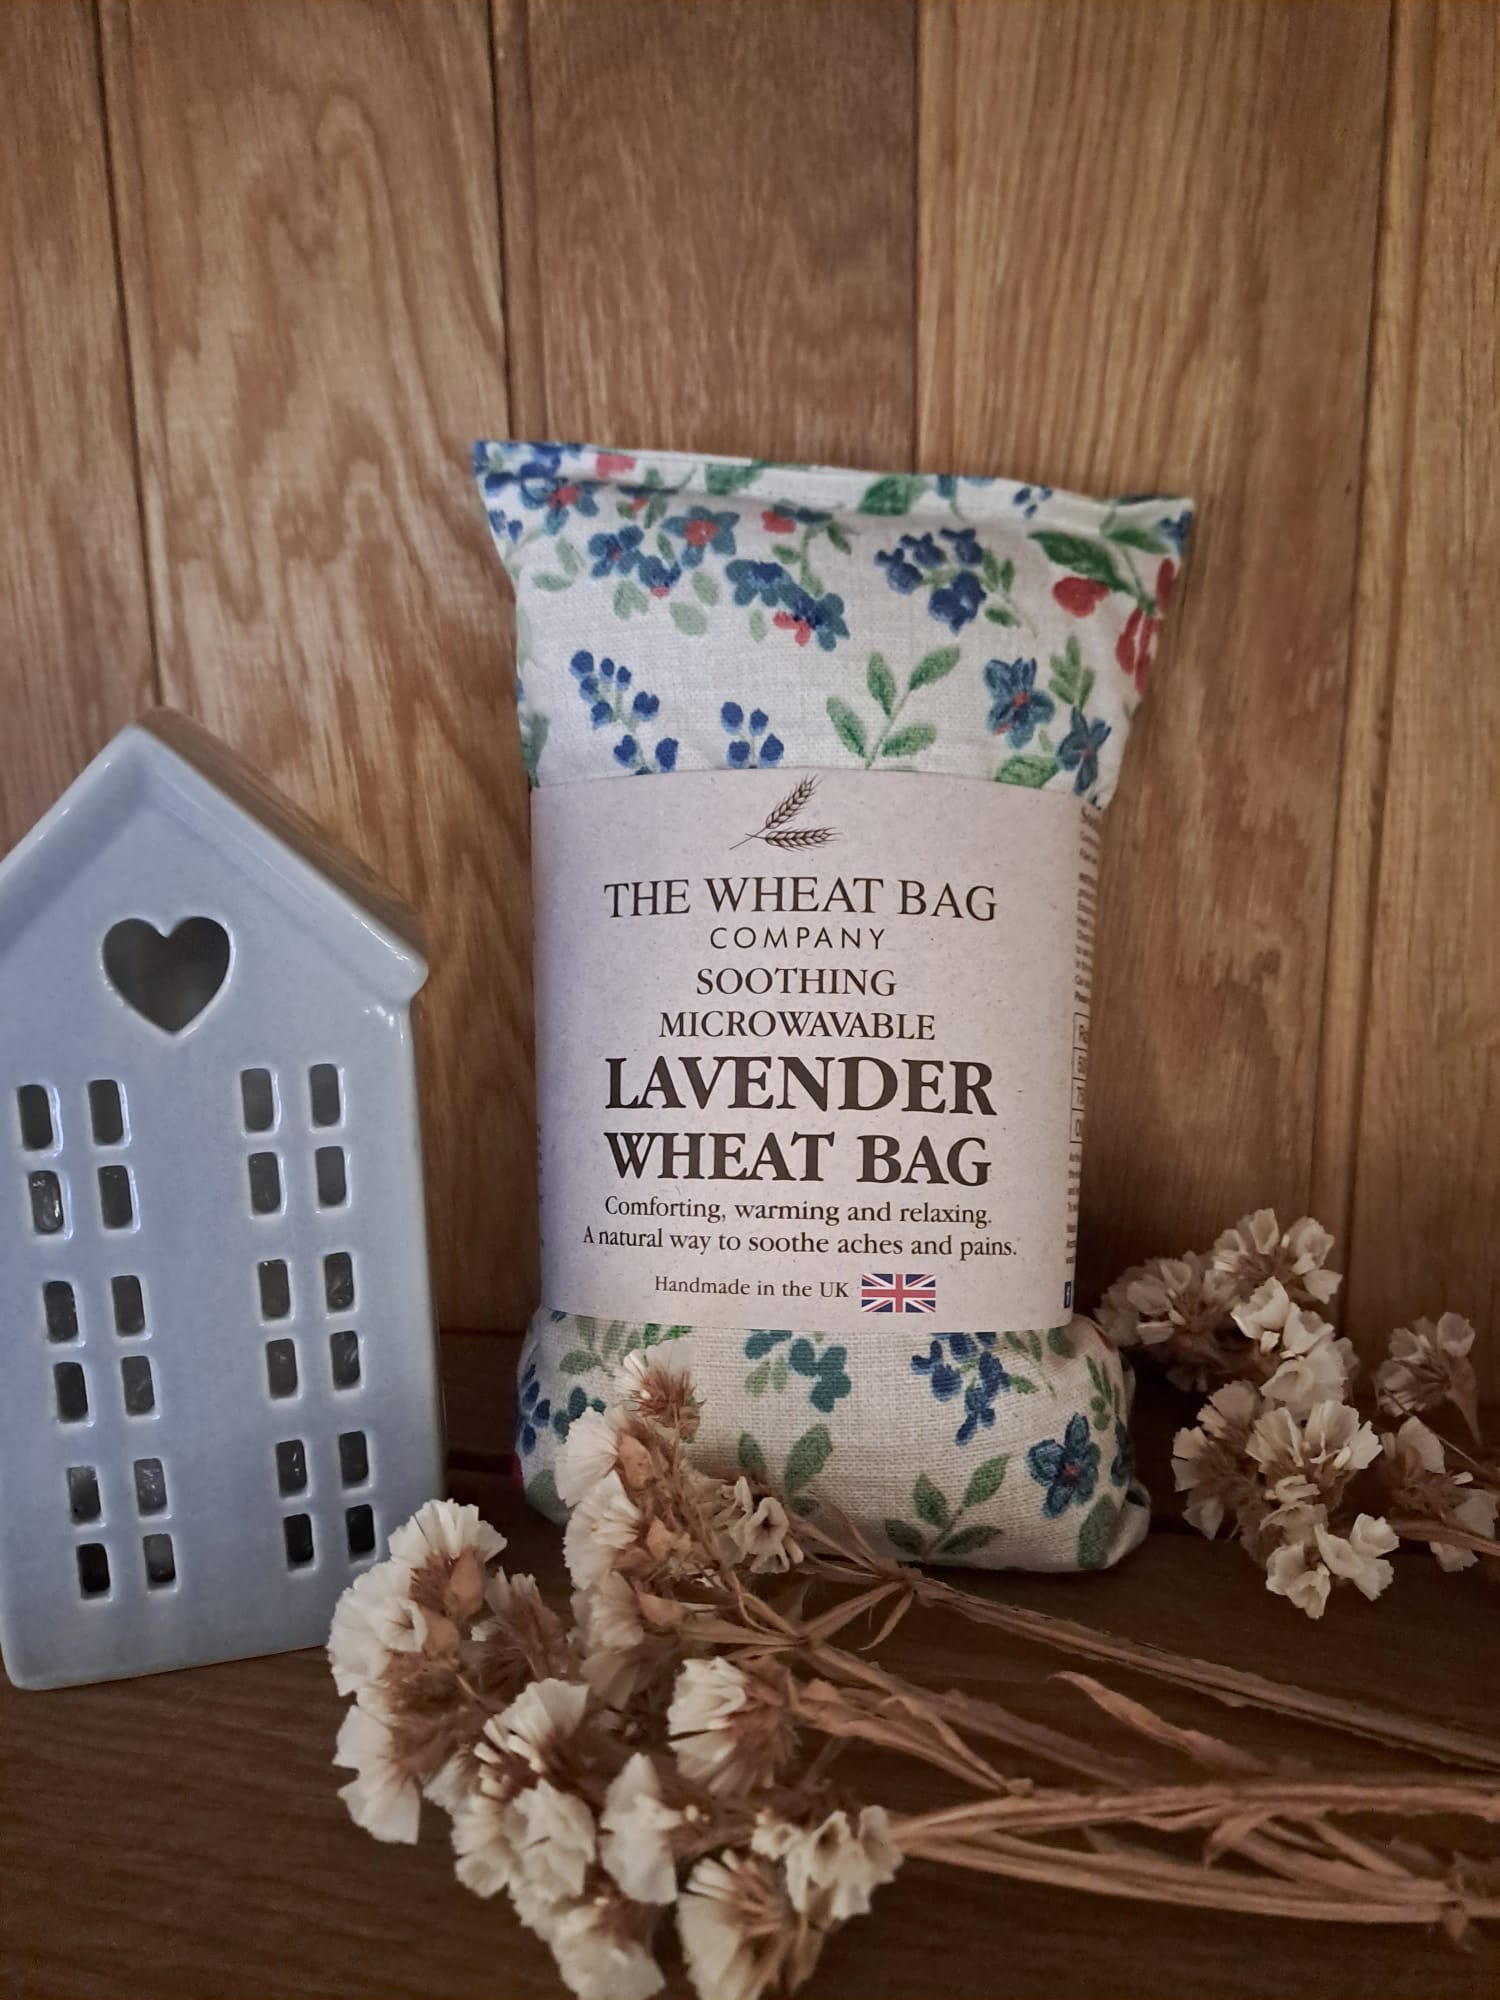 The Cottage Gardens gift shop lavender wheat for sale.